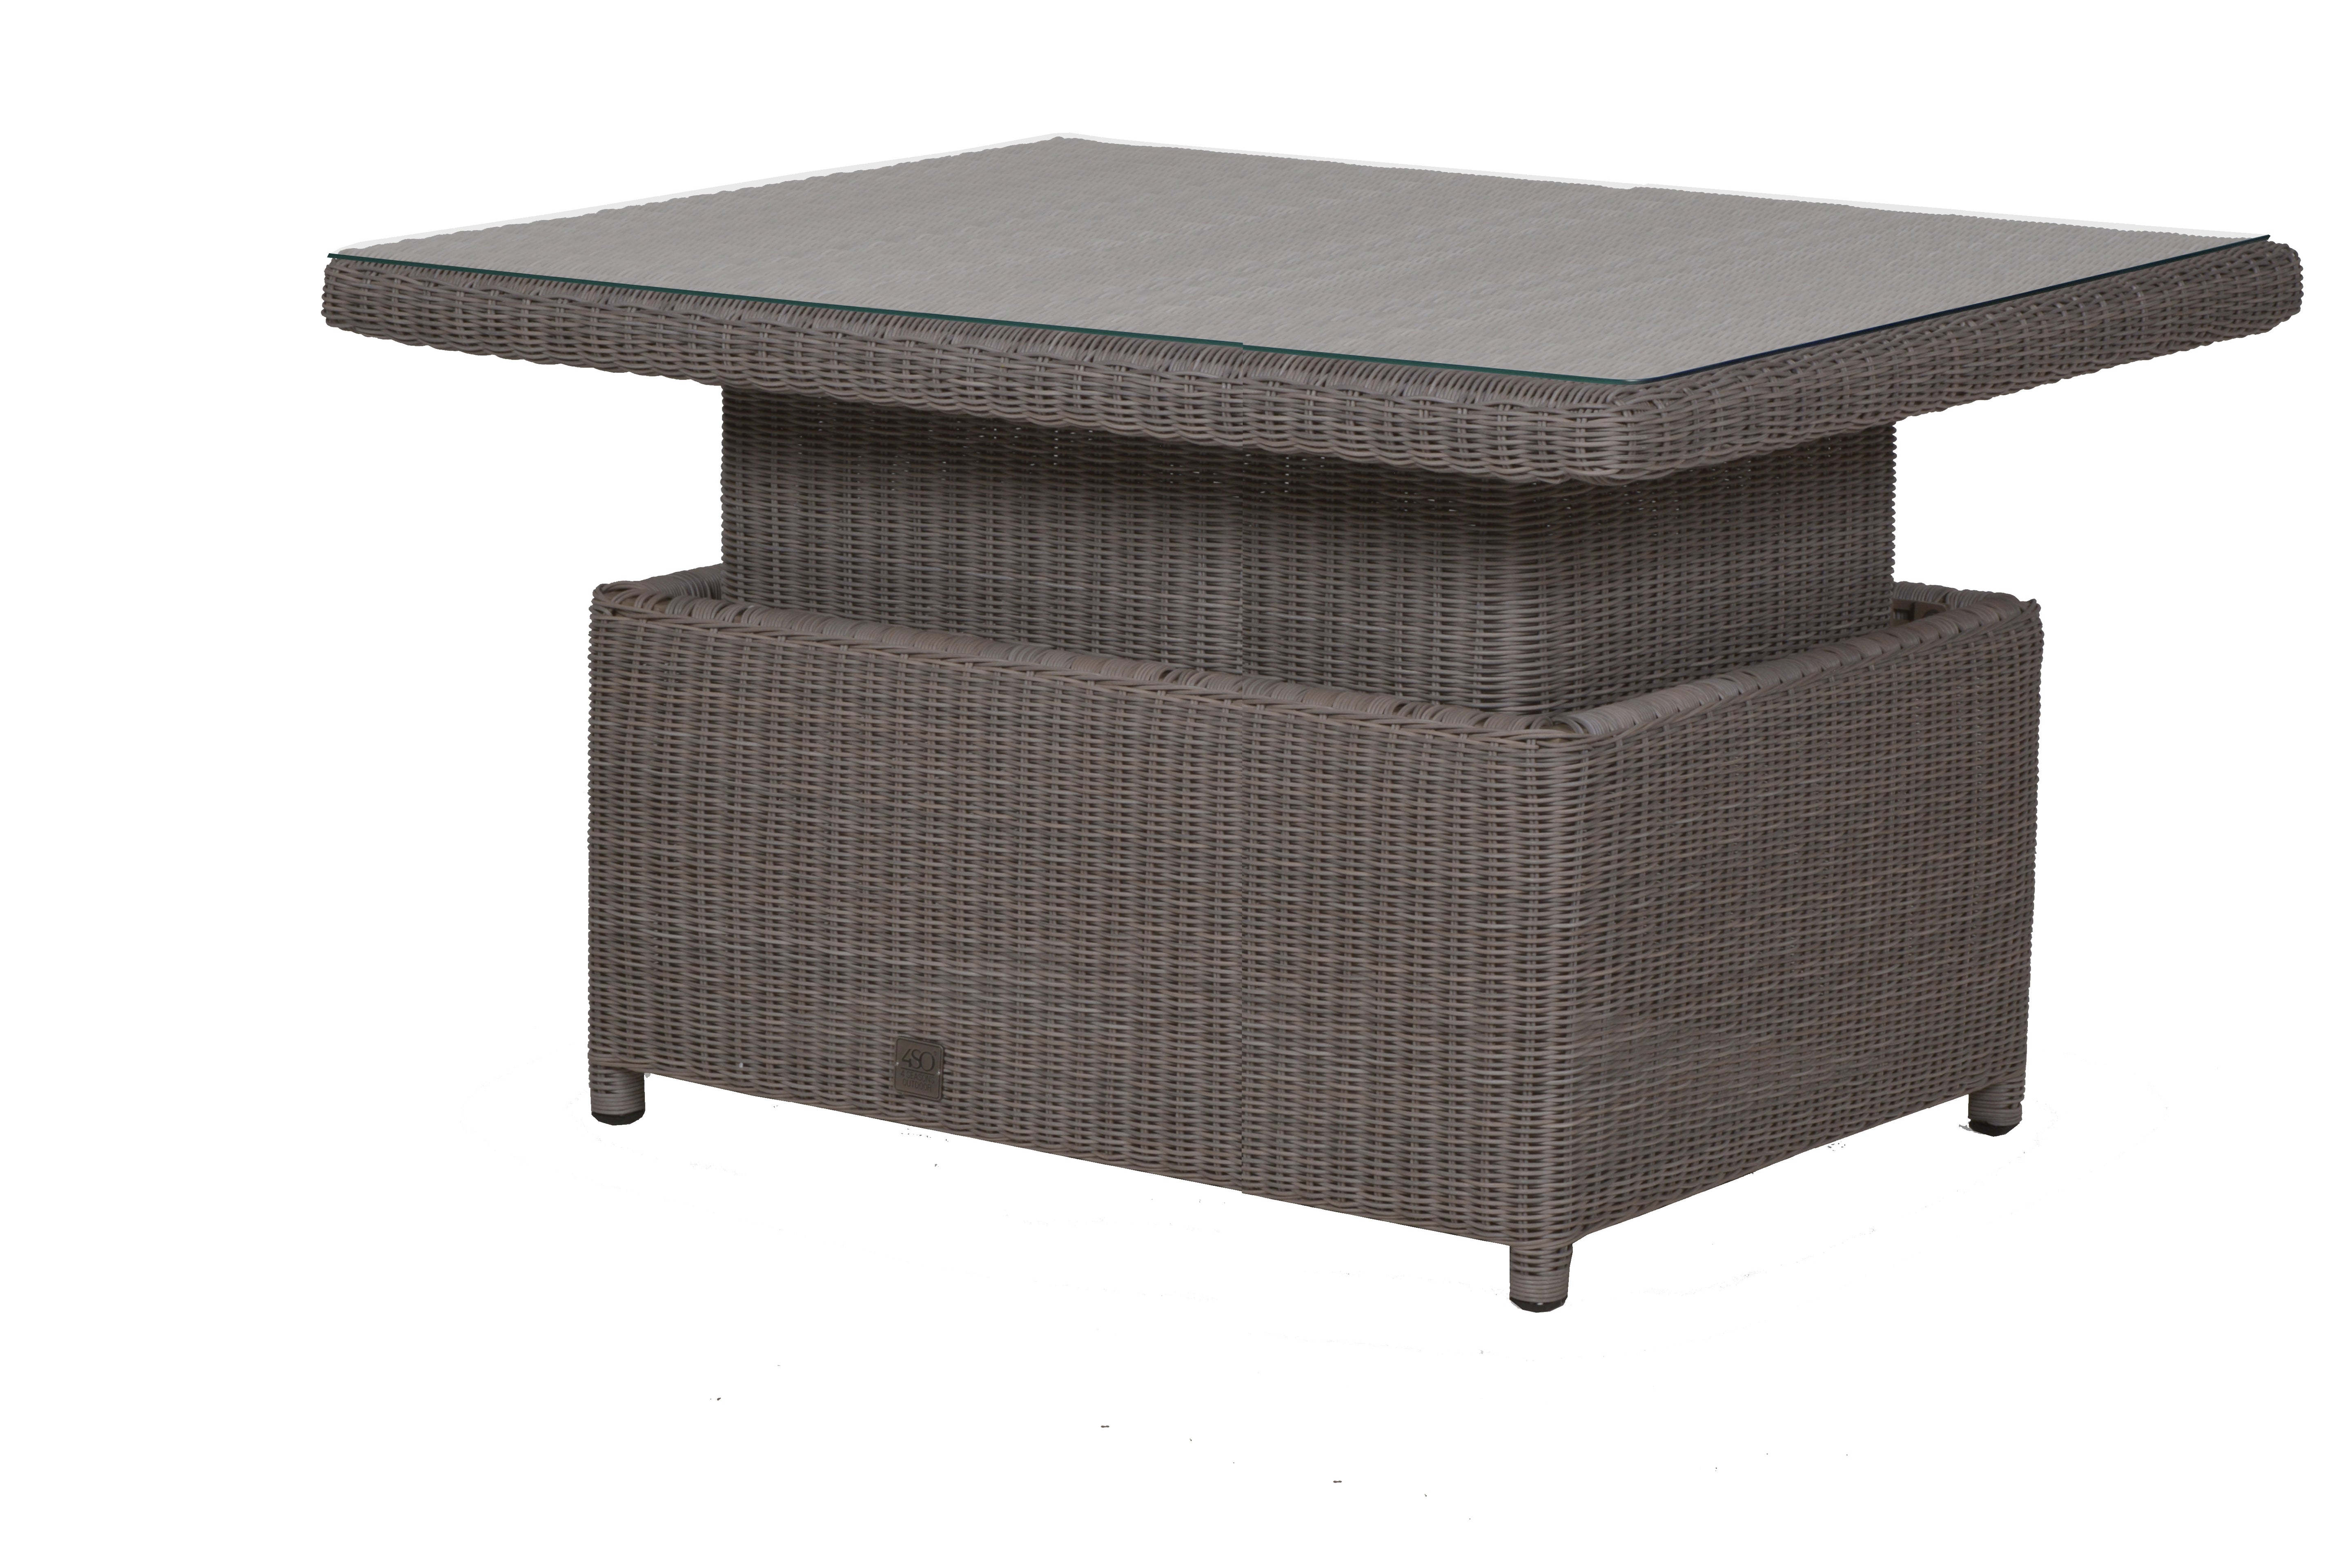 4 Seasons Outdoor Memphis Adjustable Dining Table Glass Top 150x90cm